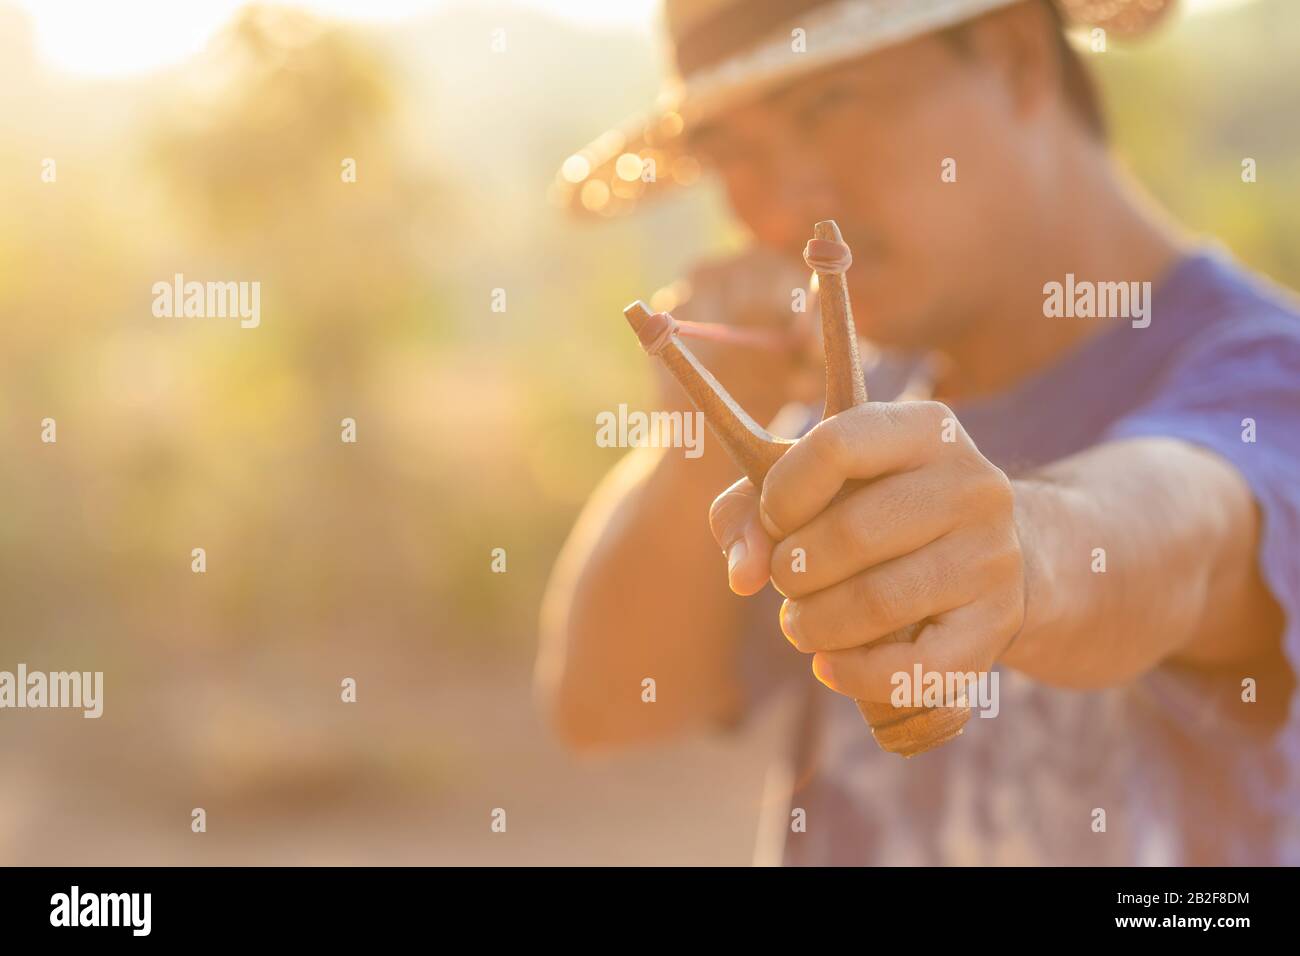 Close up man playing slingshot or catapult in morning time with sunlight effect Stock Photo